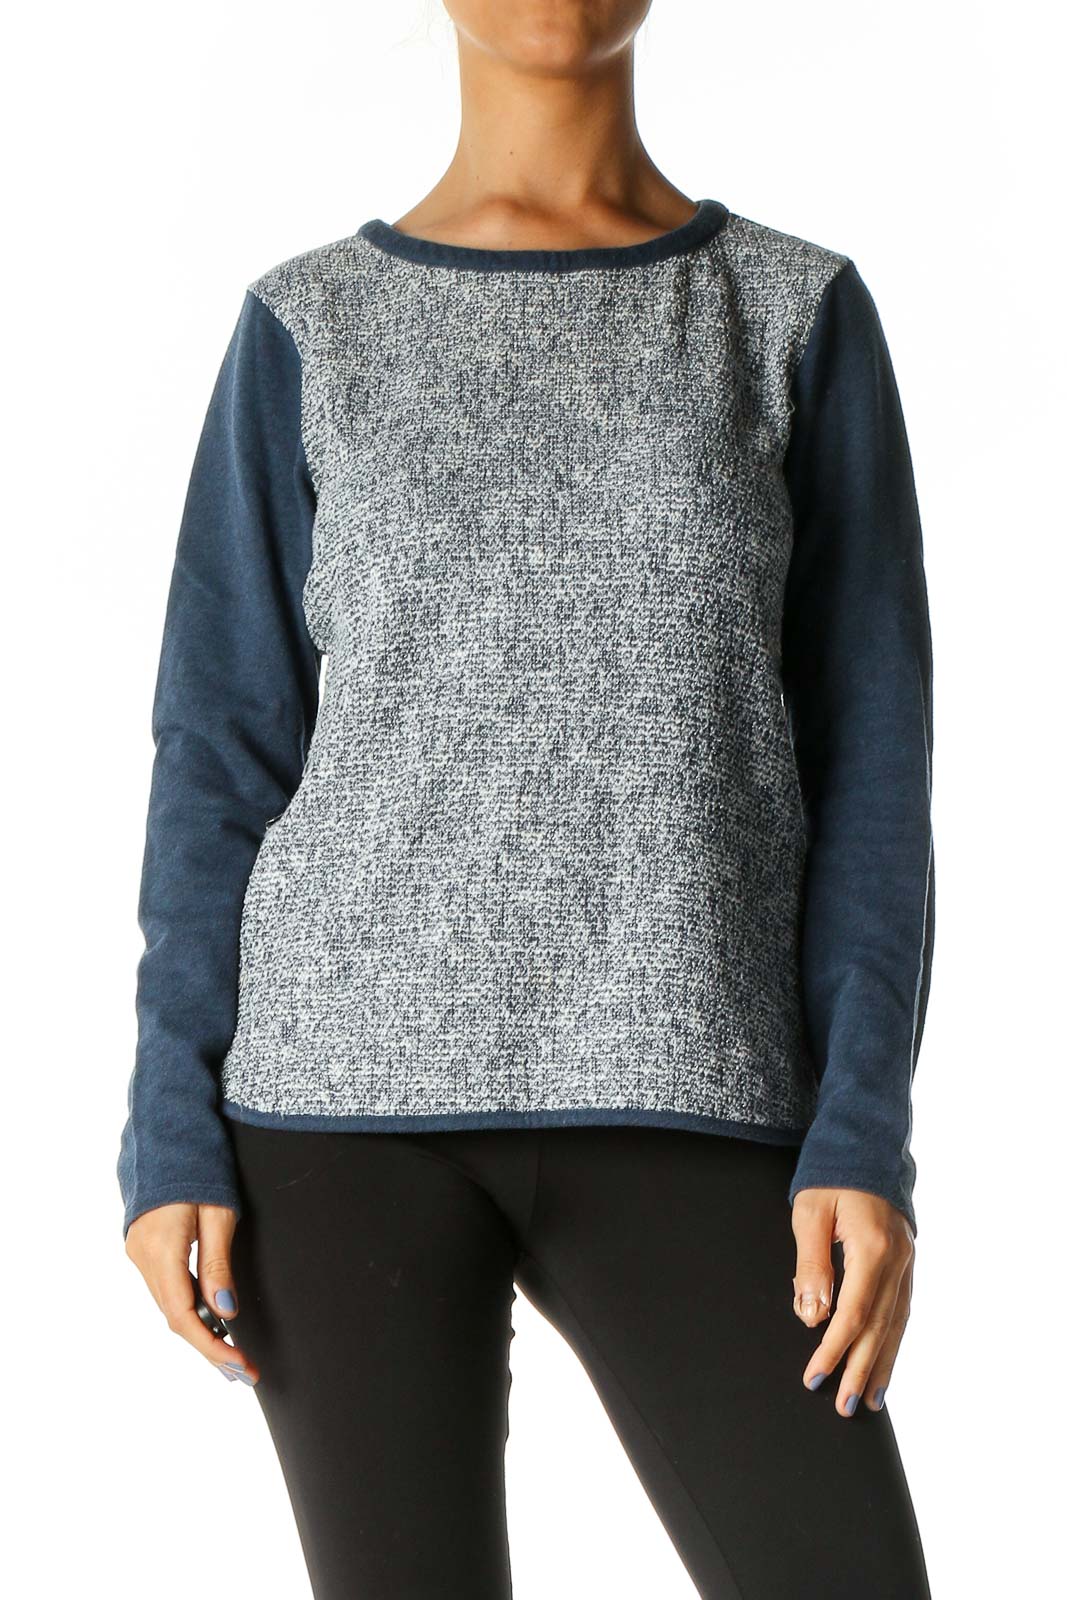 Blue Textured Sweater Front